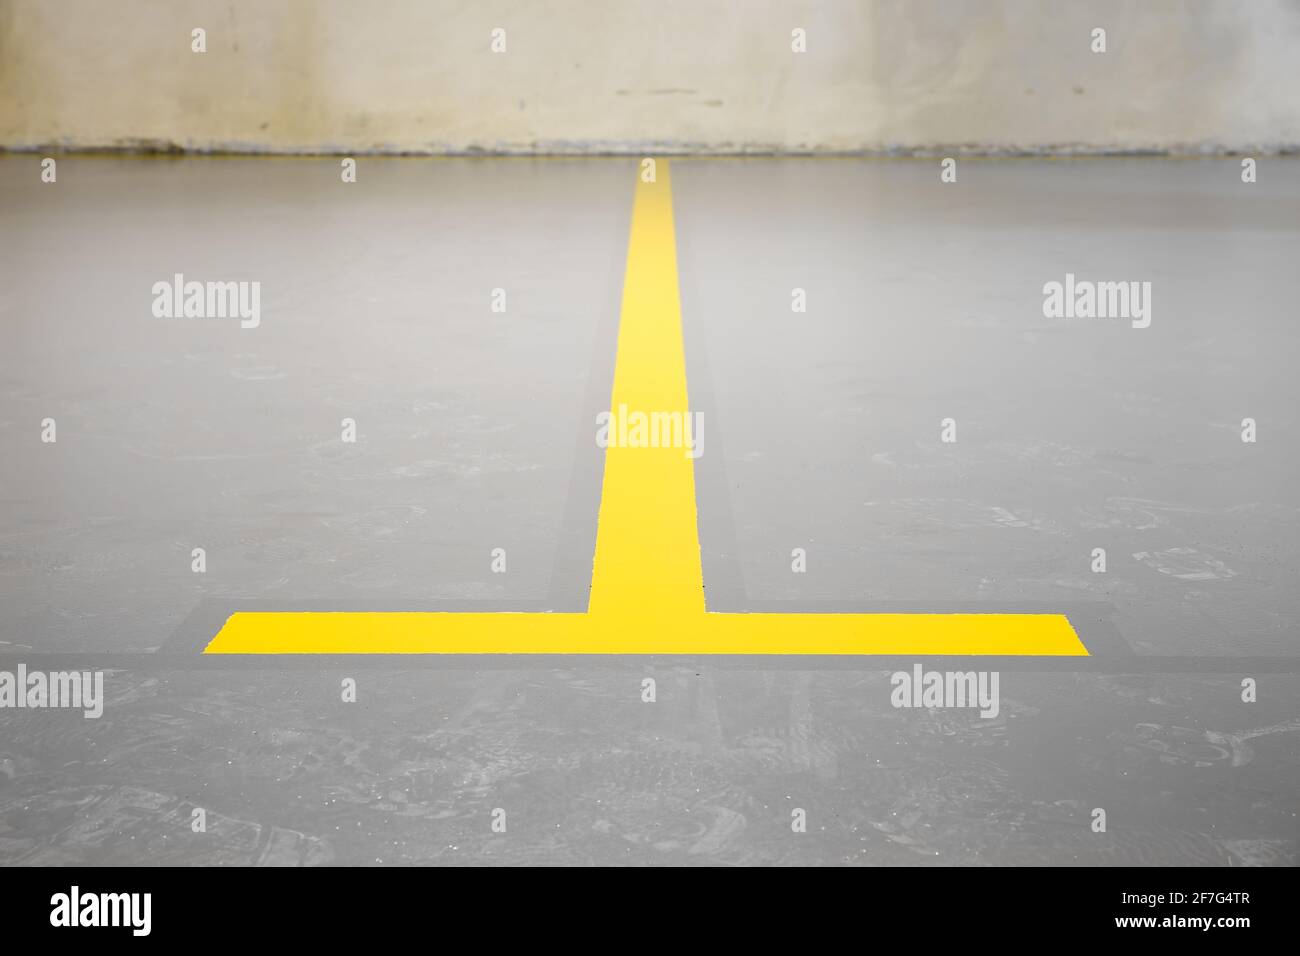 New yellow underground car park marking. Newly painted dividing line mark between two parking lots Stock Photo